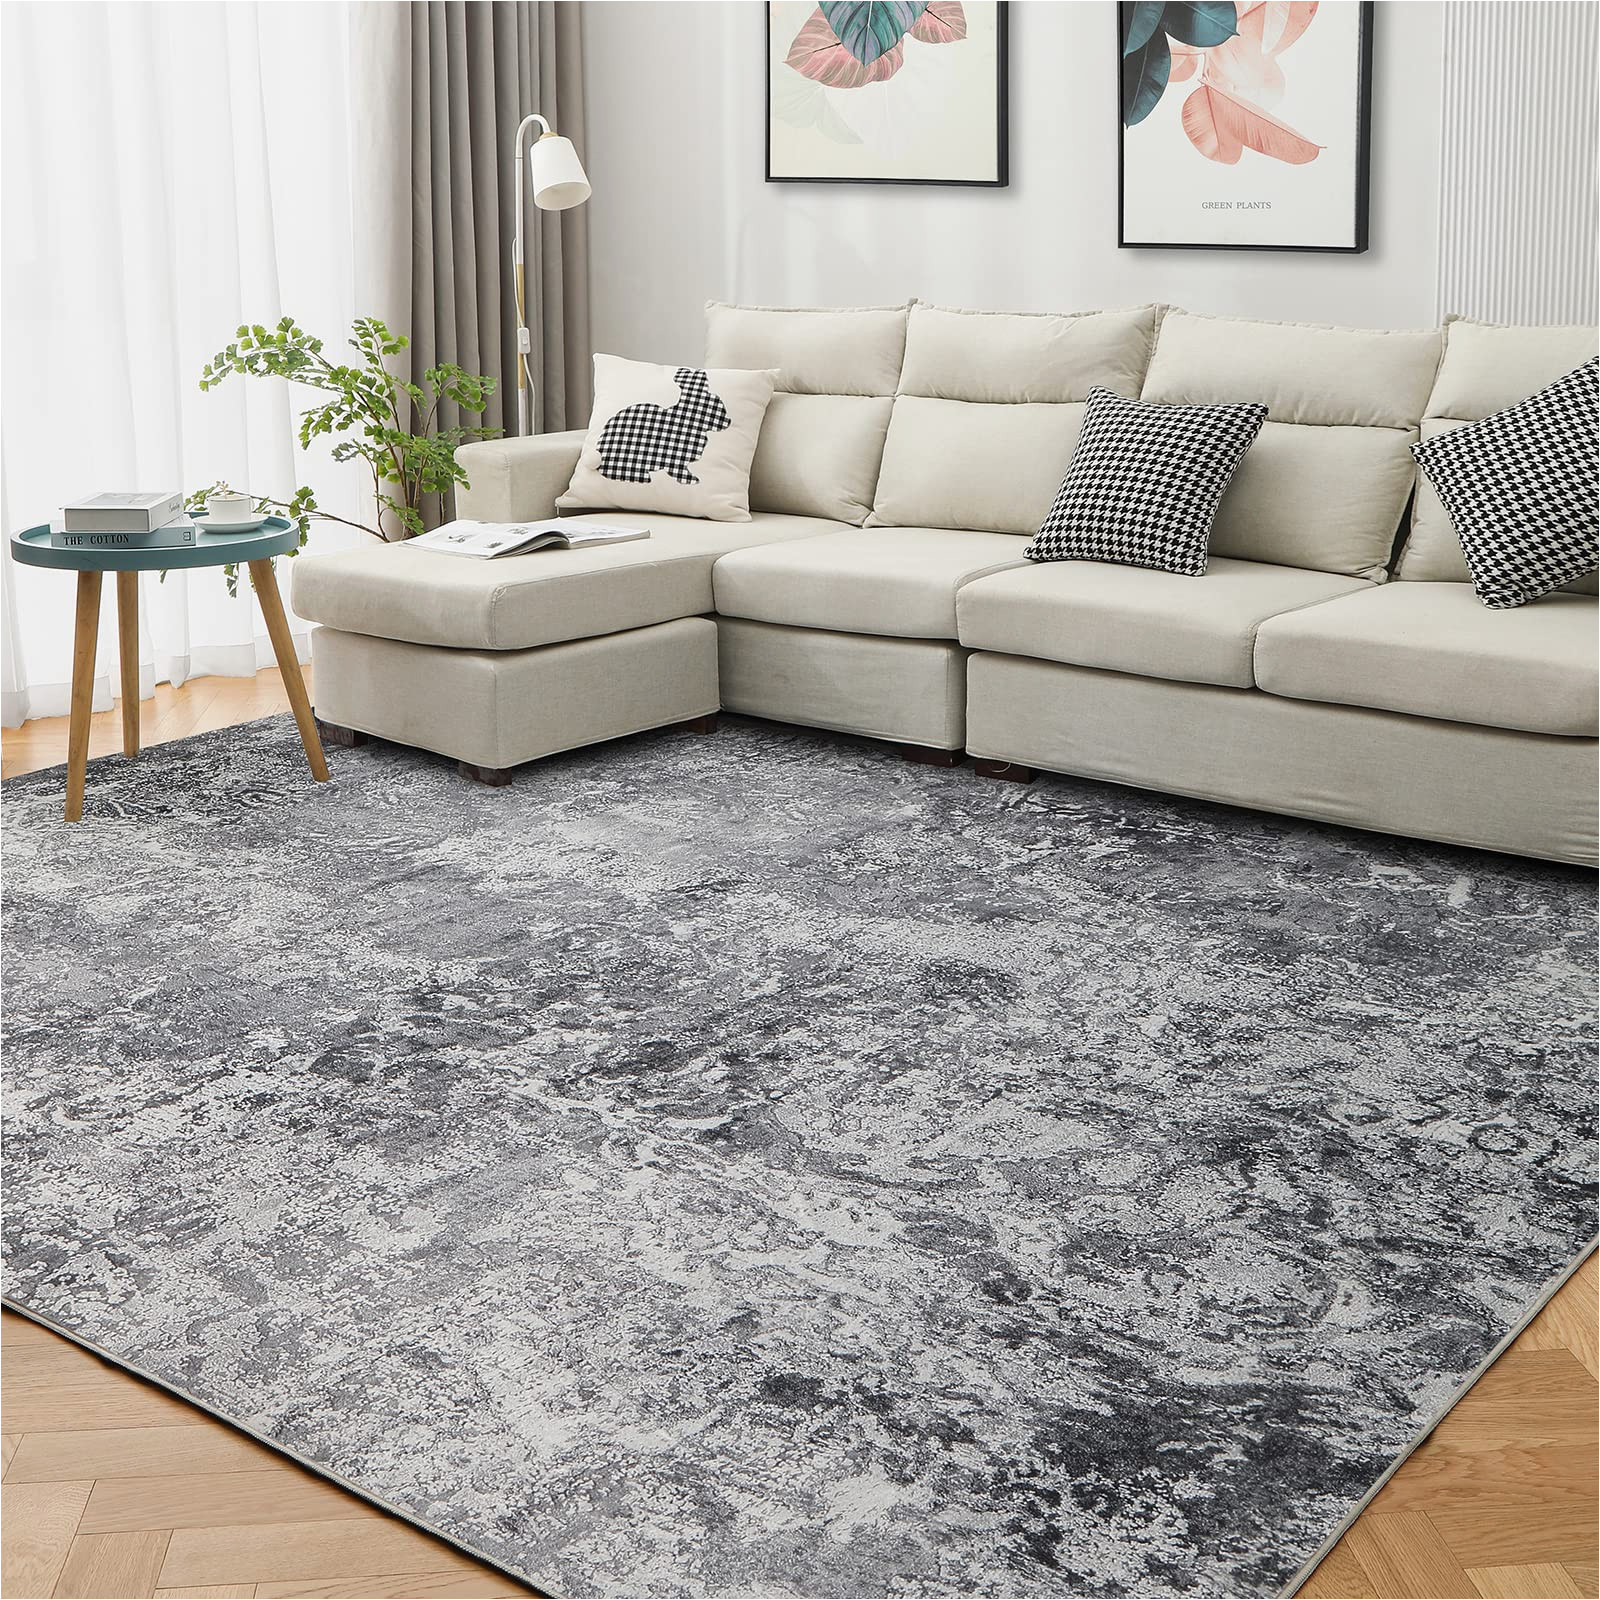 Living Spaces area Rugs 8×10 area Rug Living Room Rugs: 8×10 Indoor Abstract soft Fluffy Pile Large Carpet with Low Shaggy for Bedroom Dining Room Home Office Decor Under Kitchen …